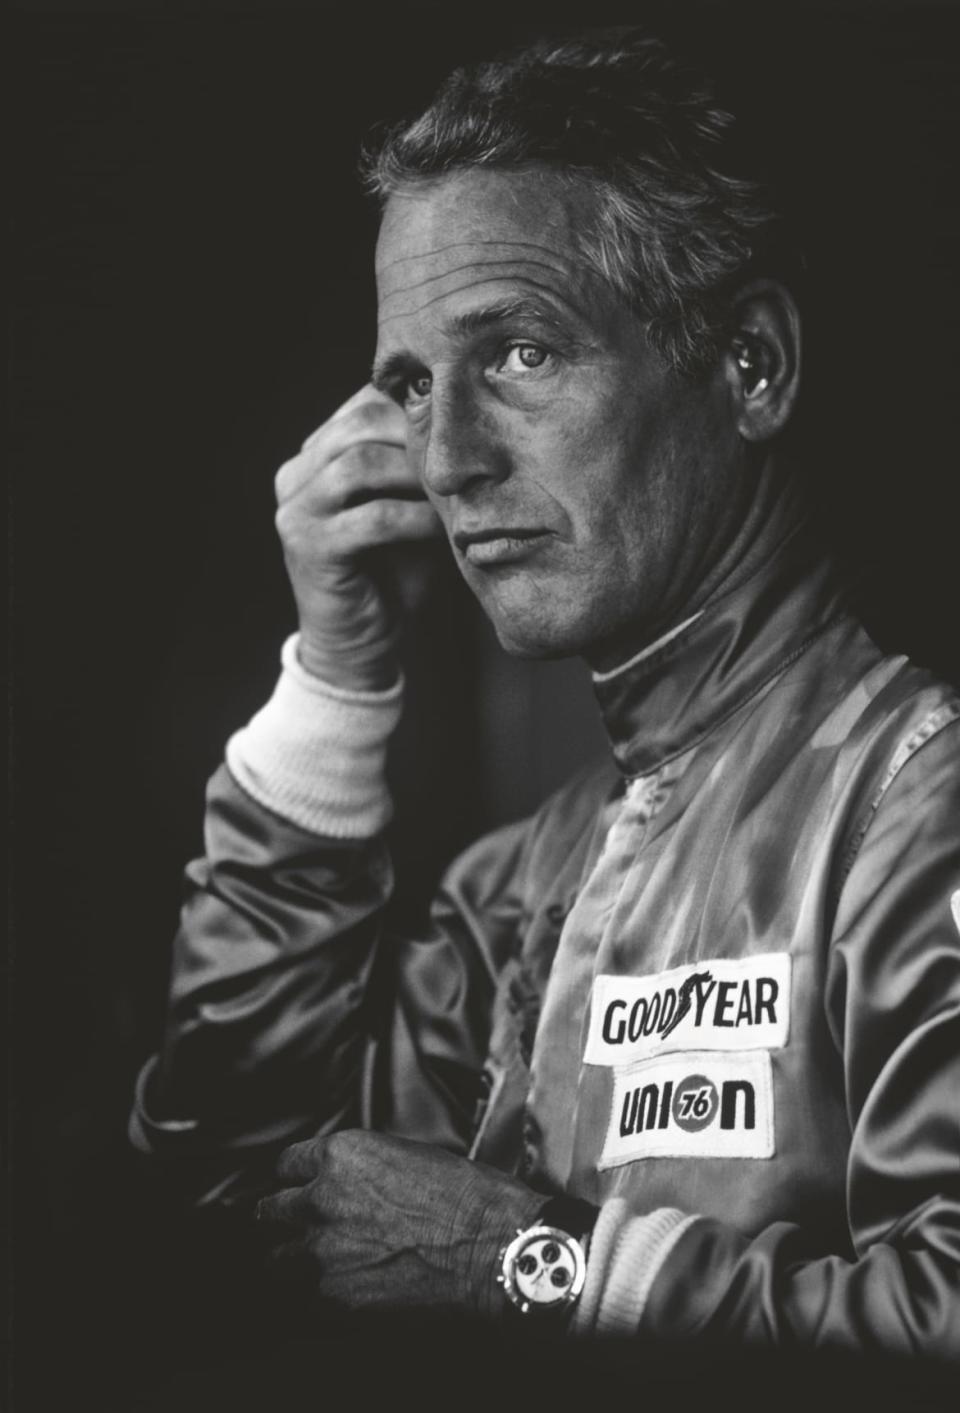 <div class="inline-image__caption"><p>Paul Newman photographed during a 12-hour race where he was co-driving a Porsche 911S with Bill Freeman at Sebring raceway in Florida on March 19, 1977.</p></div> <div class="inline-image__credit">Al Satterwhite/ACC Art Books</div>